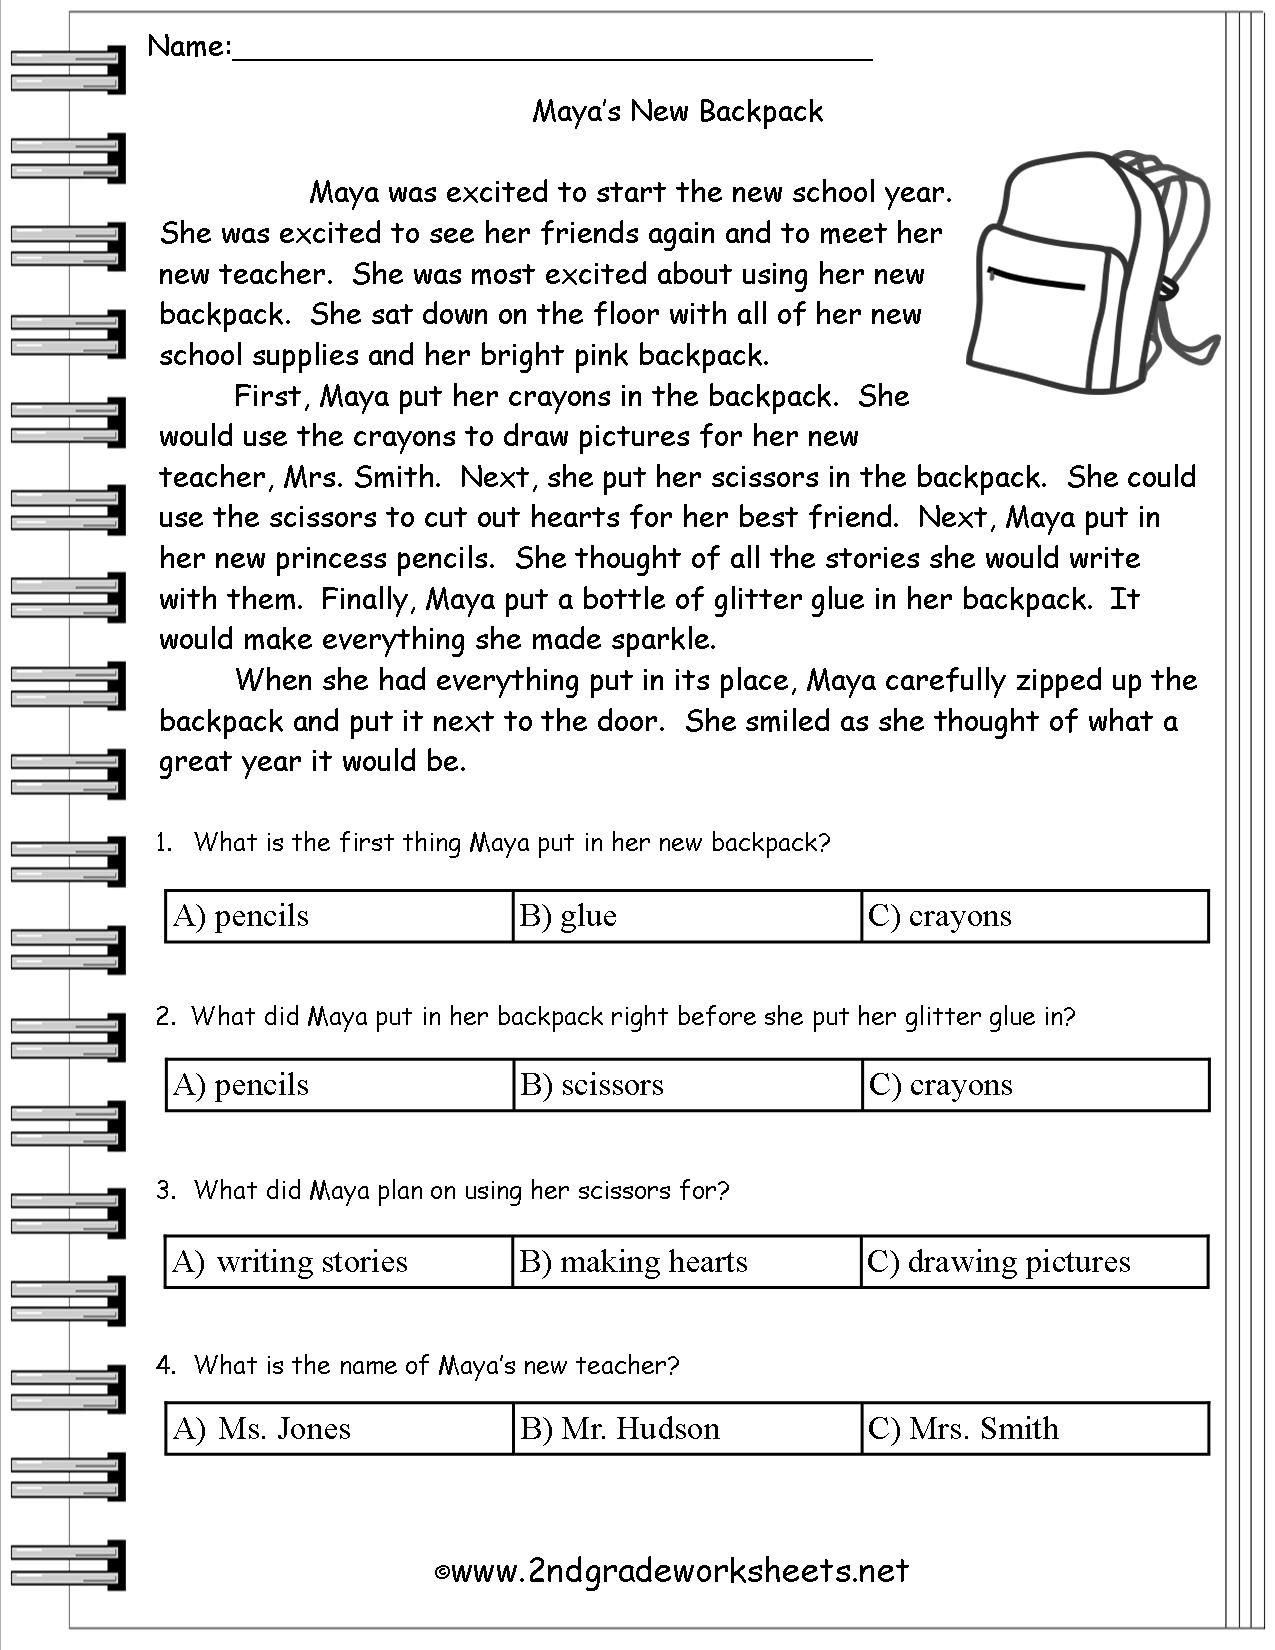 Worksheet Free Lesson Plans For Elementary Comprehension Passages Or Spanish Lesson Worksheets